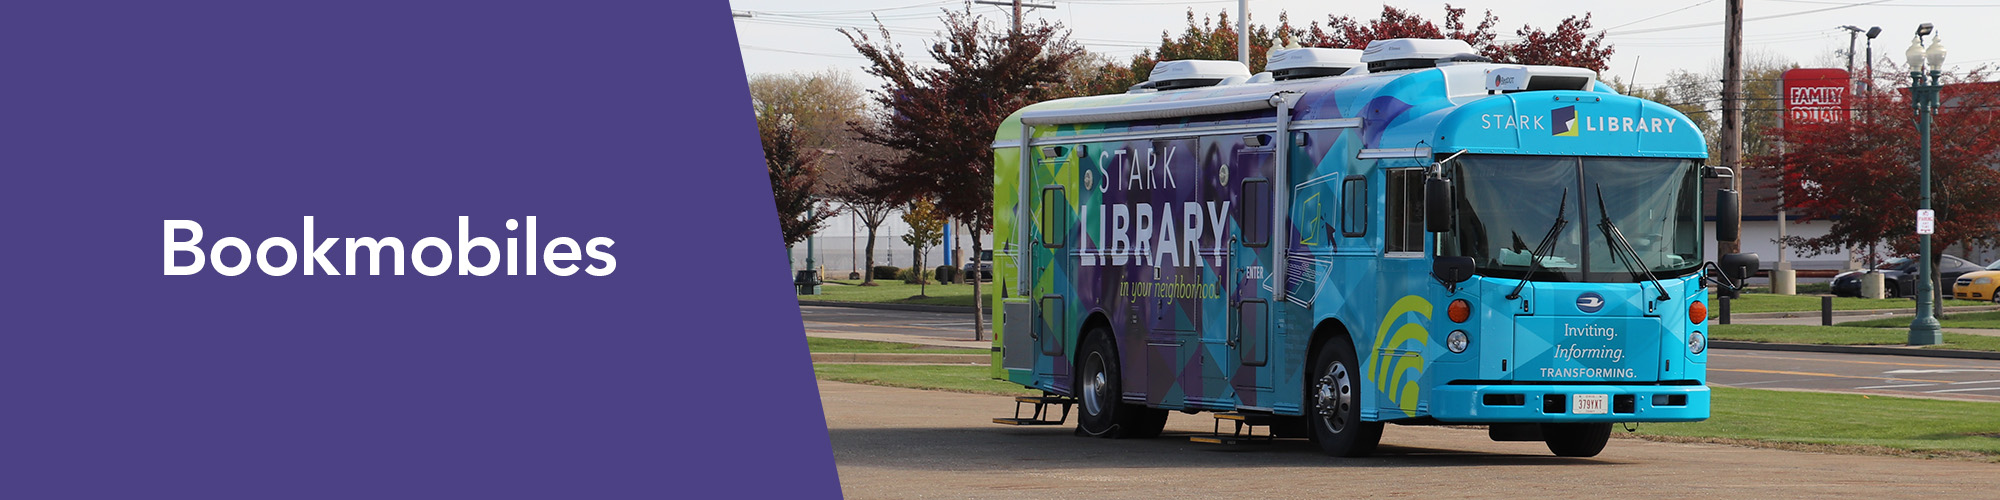 A colorful Stark Library bookmobile